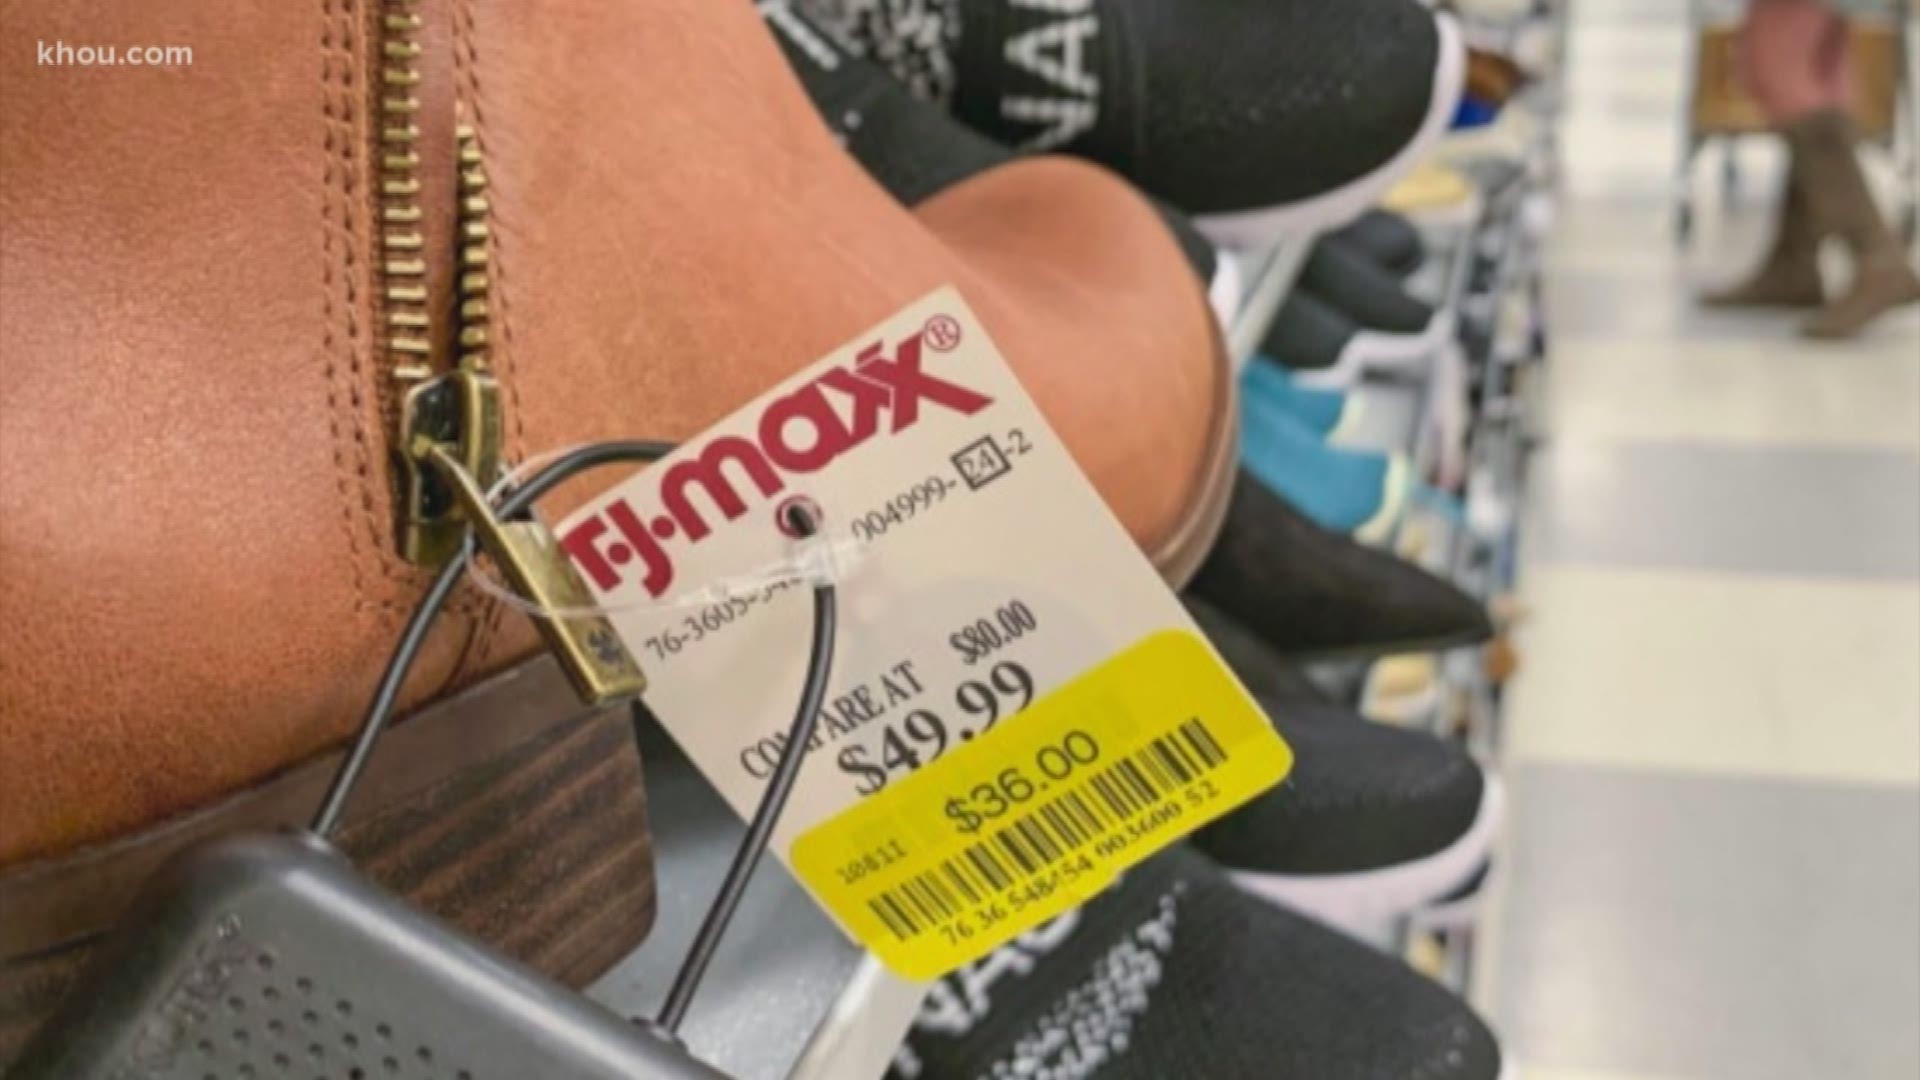 Where do you look for fashionable clothing at a low price? TJ Maxx and Marshall's have good finds as well.